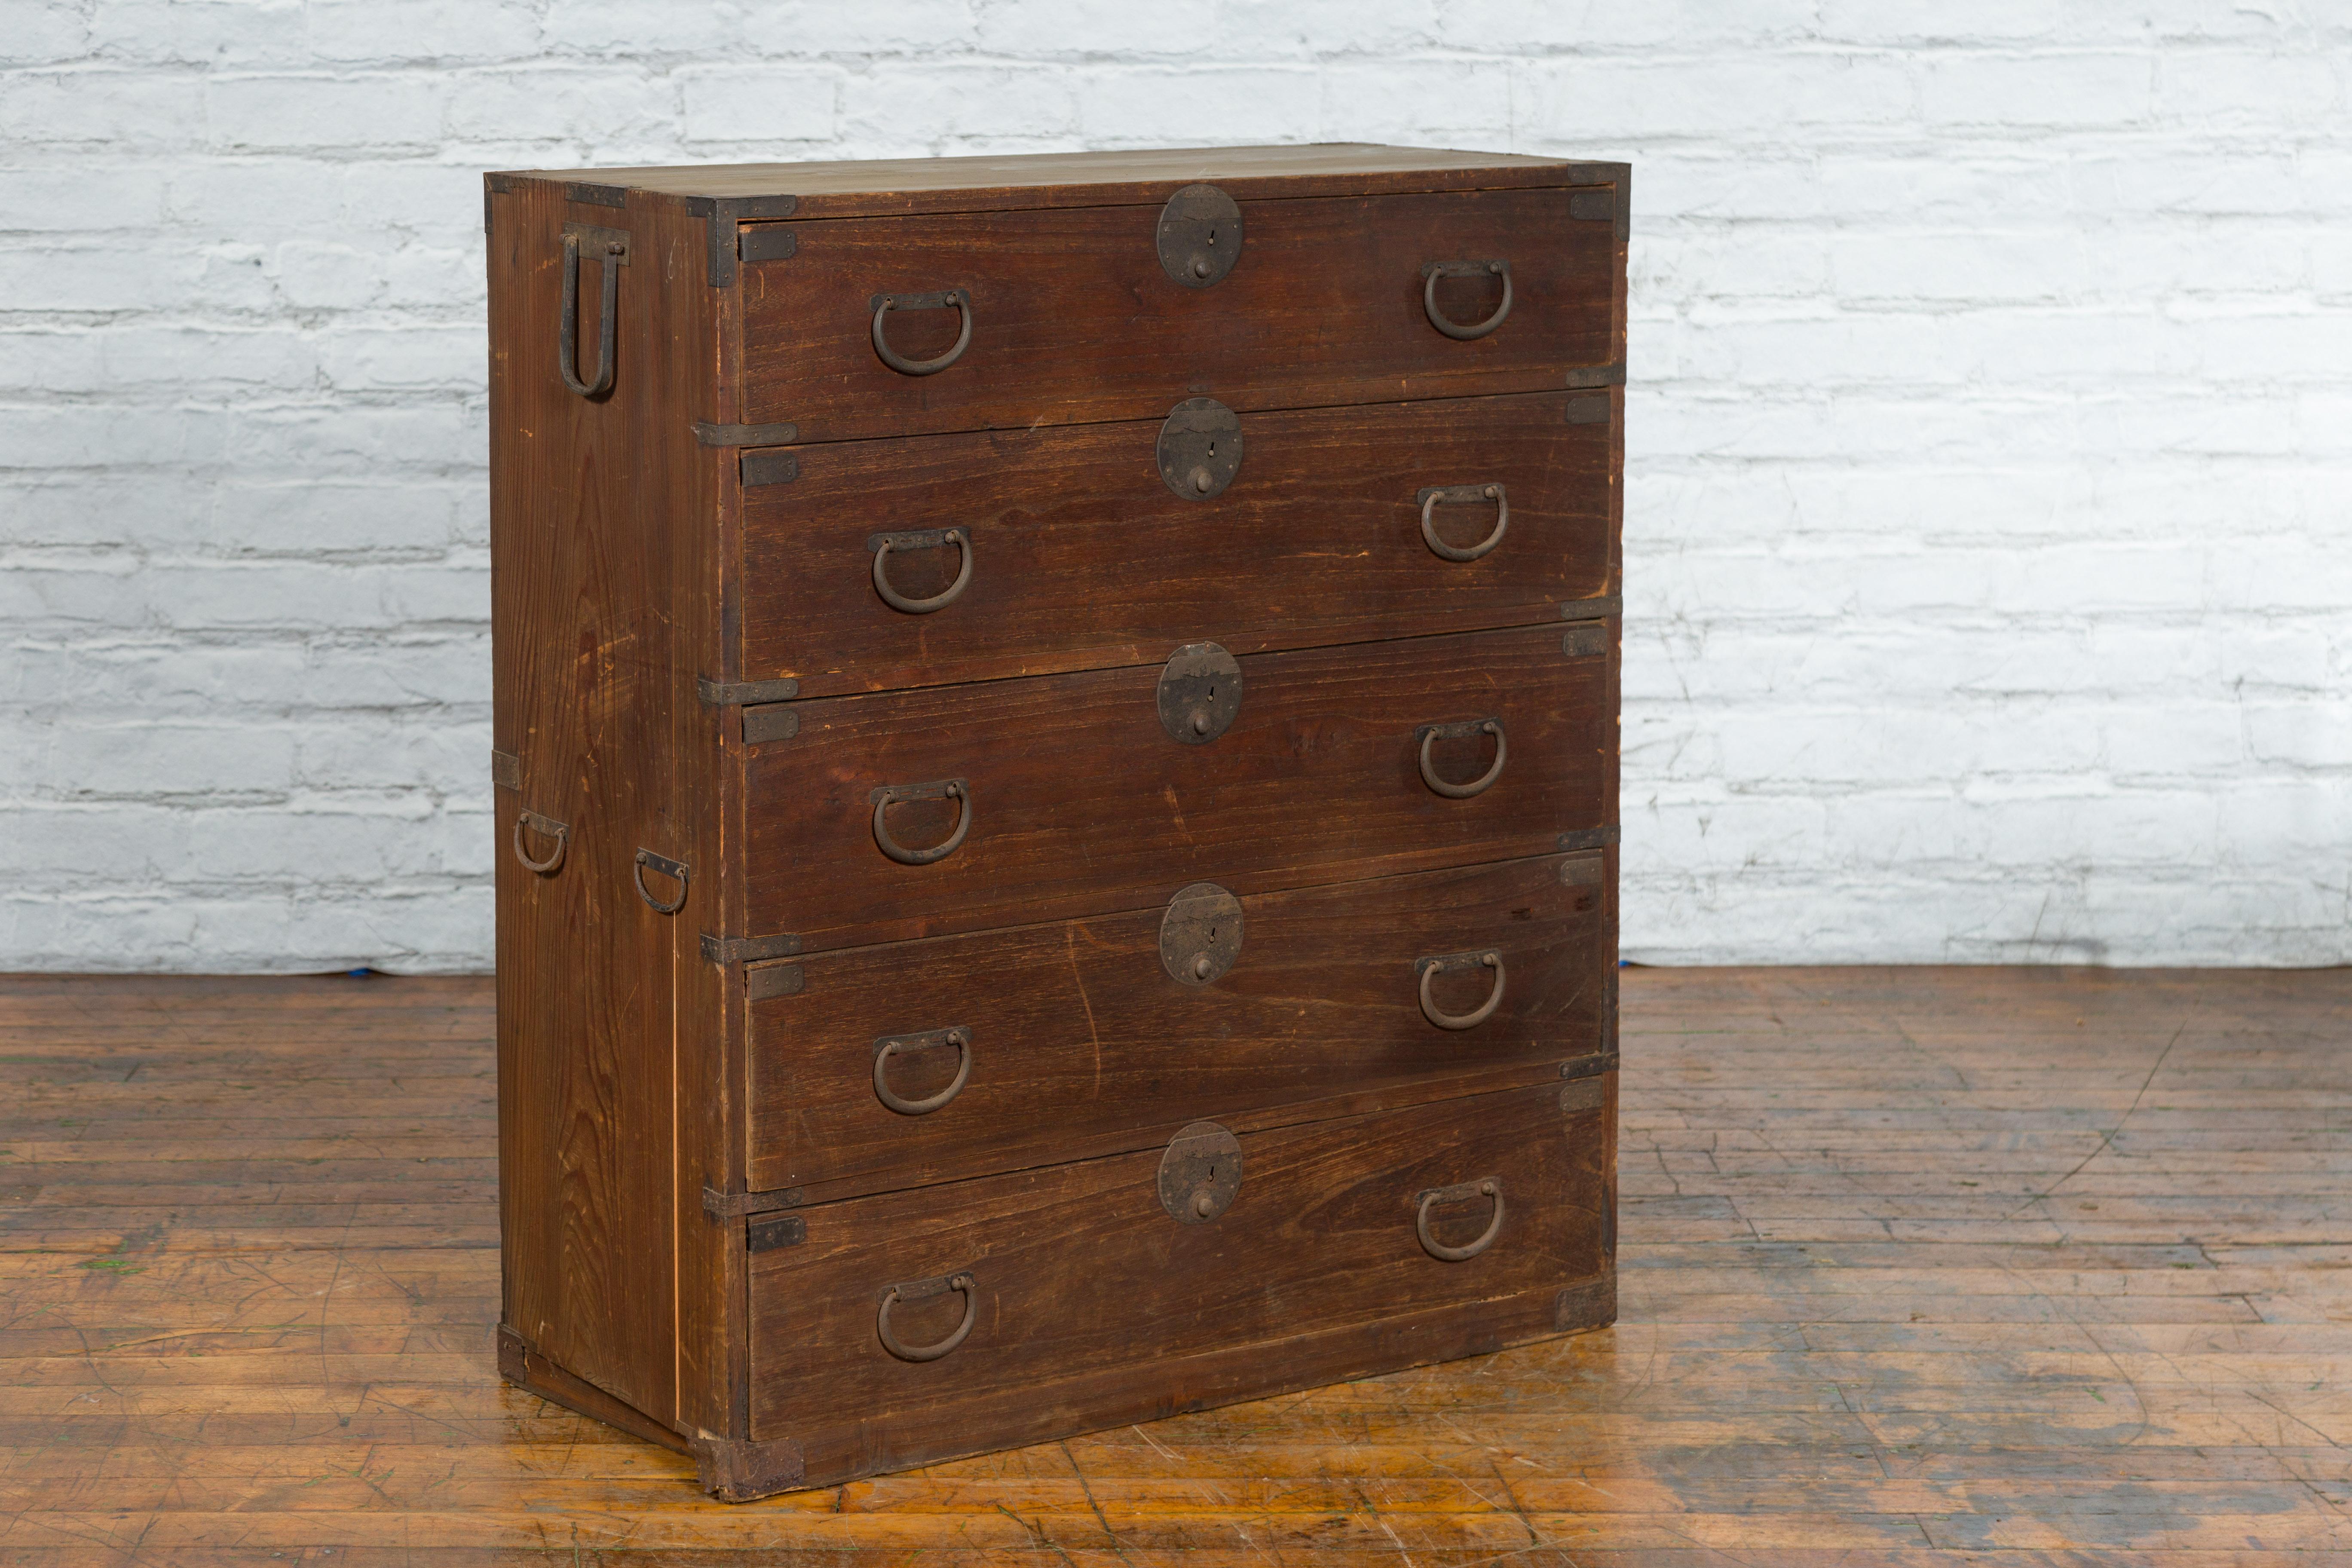 20th Century Japanese Taishō Tansu Clothing Chest in Isho-Dansu Style with Five Drawers